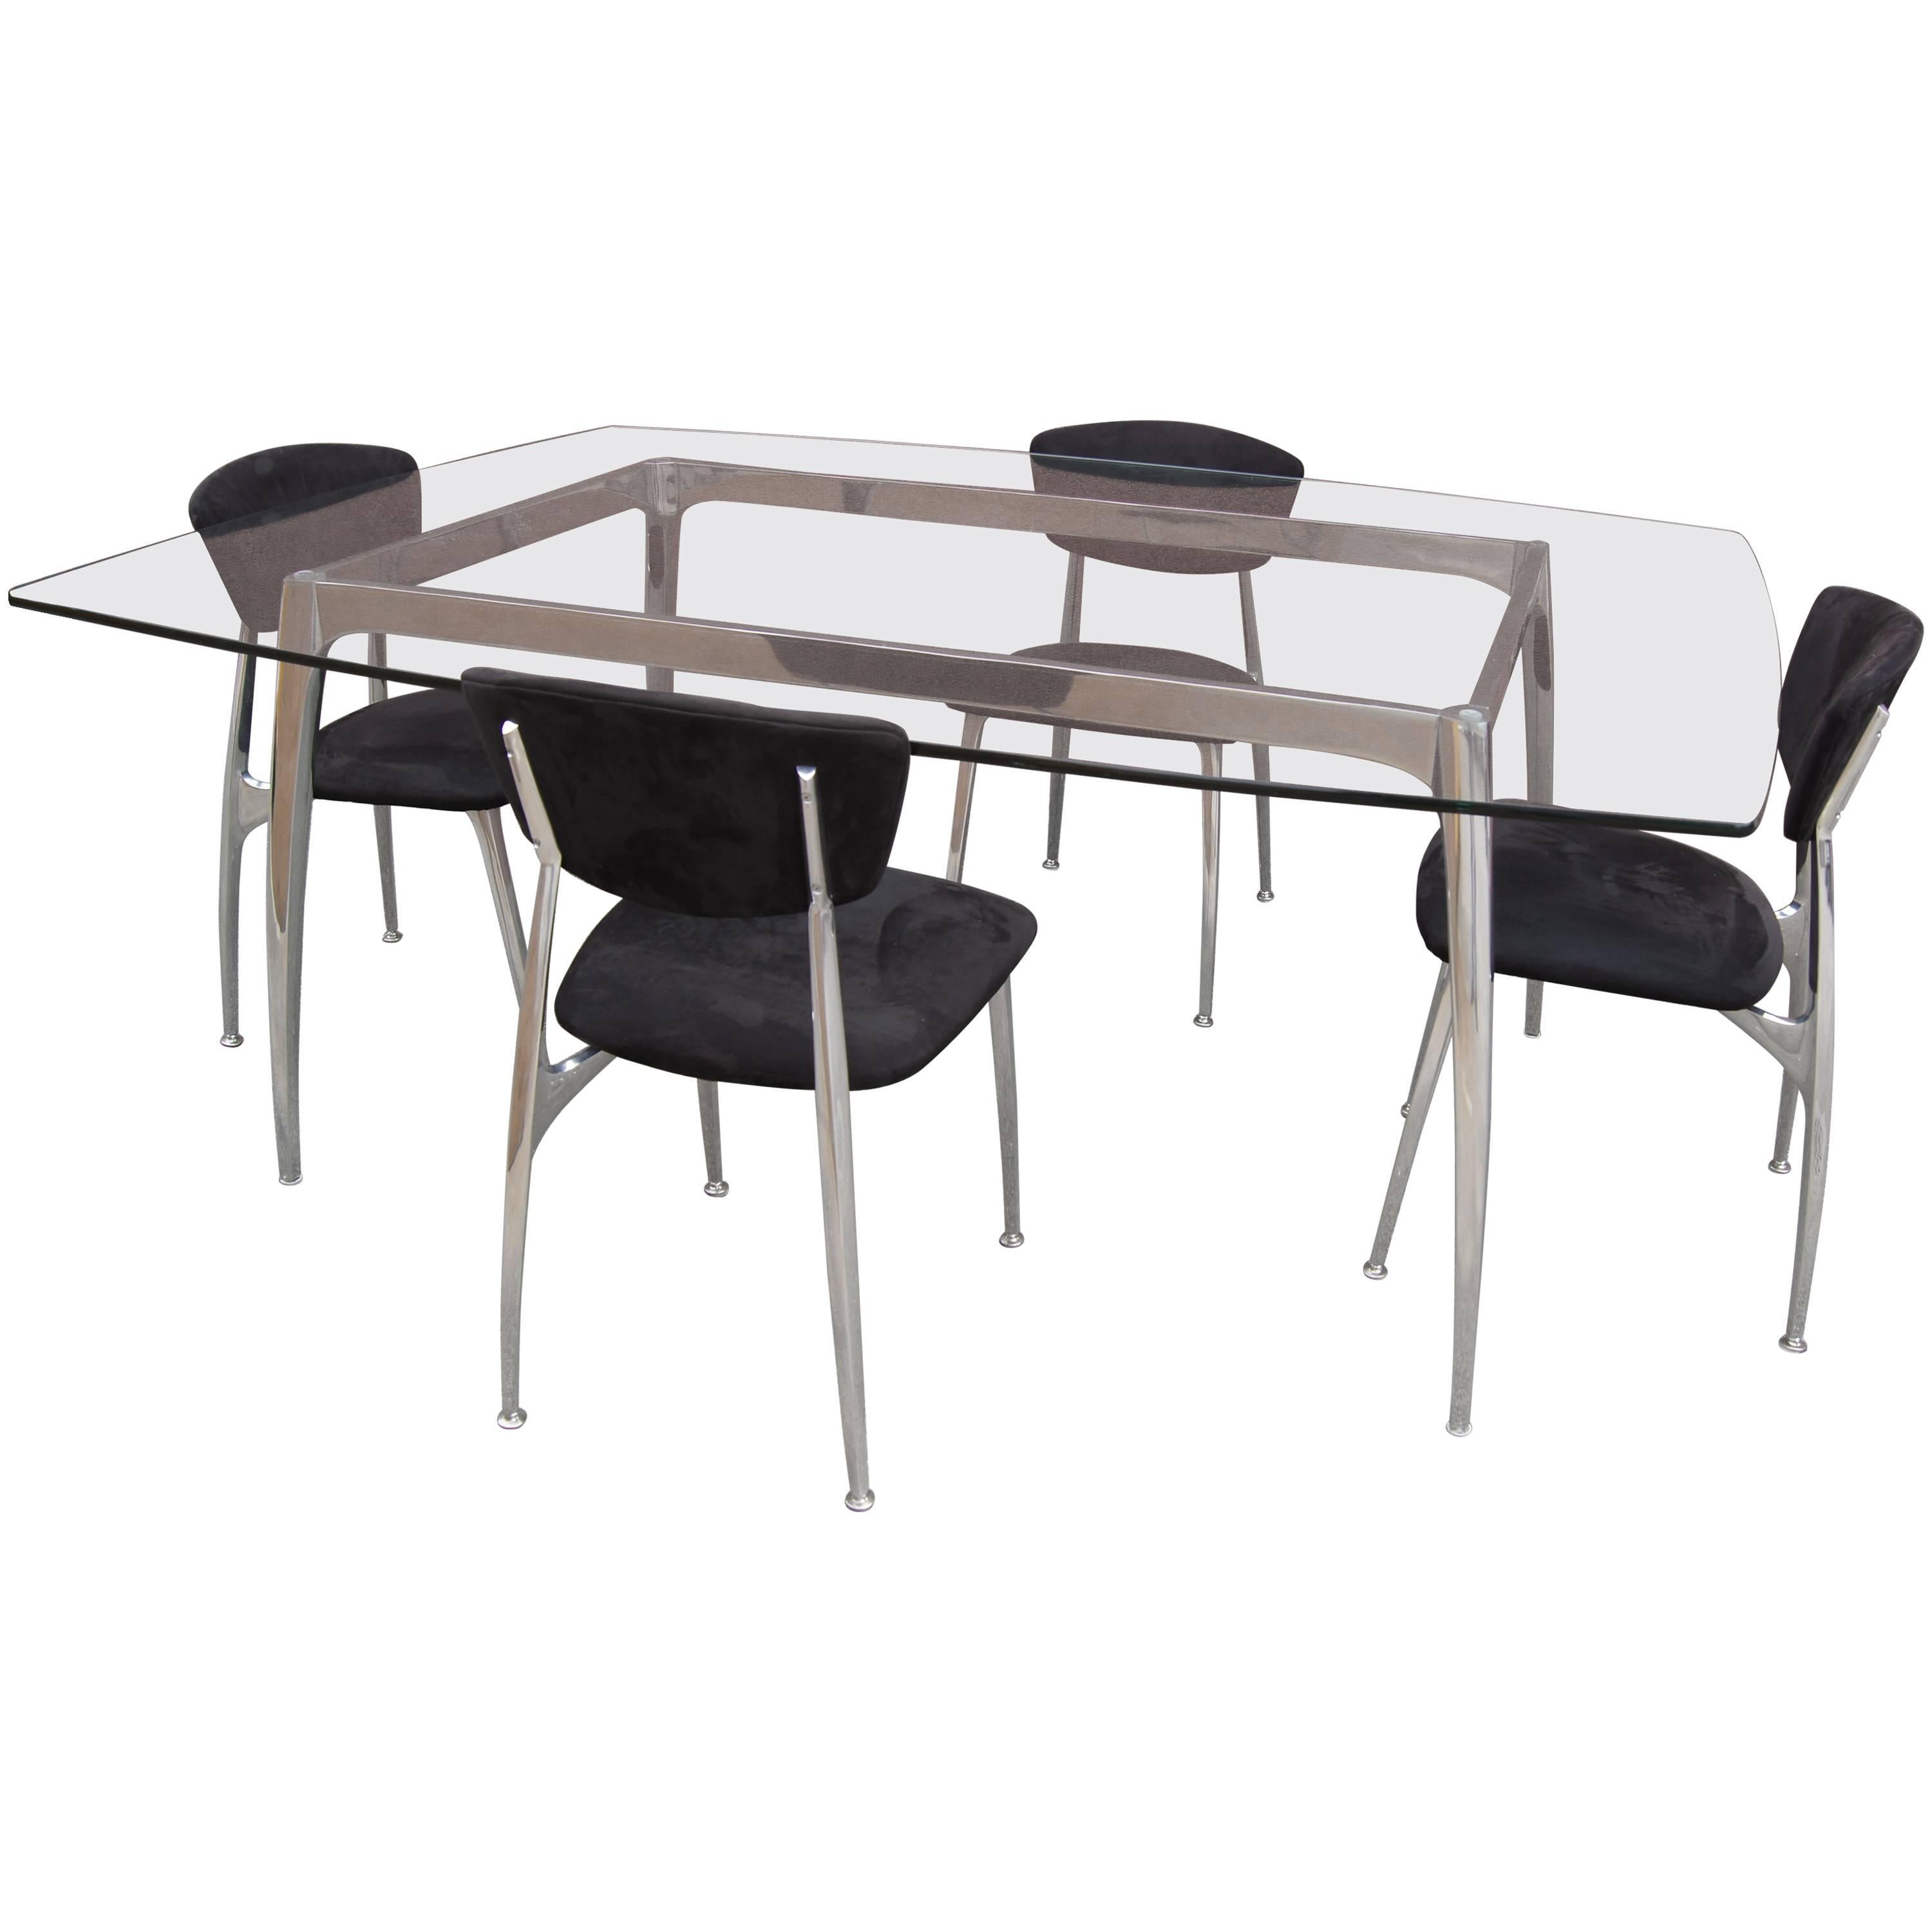 Polished Aluminum and Glass Dining Table with Matching Chairs by Nambé